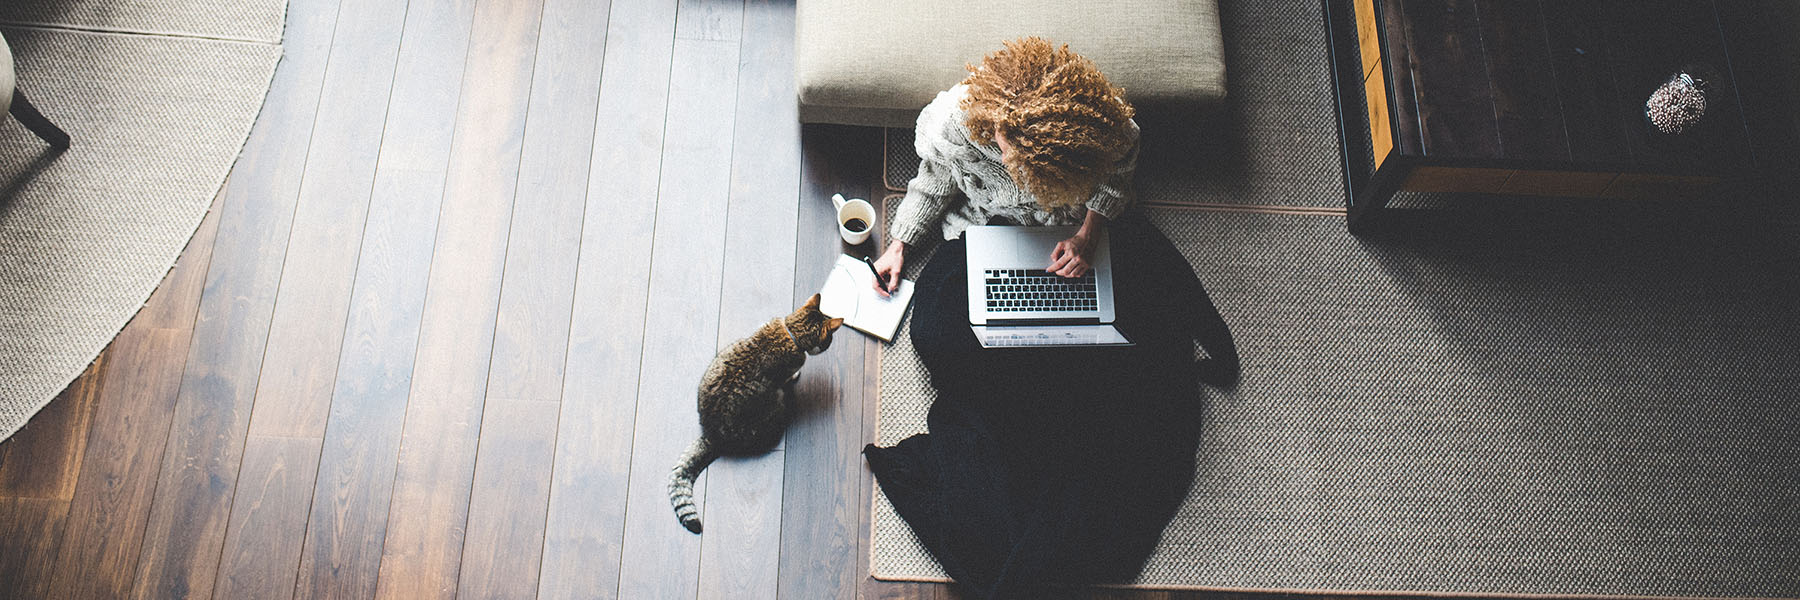 A woman sitting on the floor working on some papers. She has a cat watching her and a laptop on her lap.